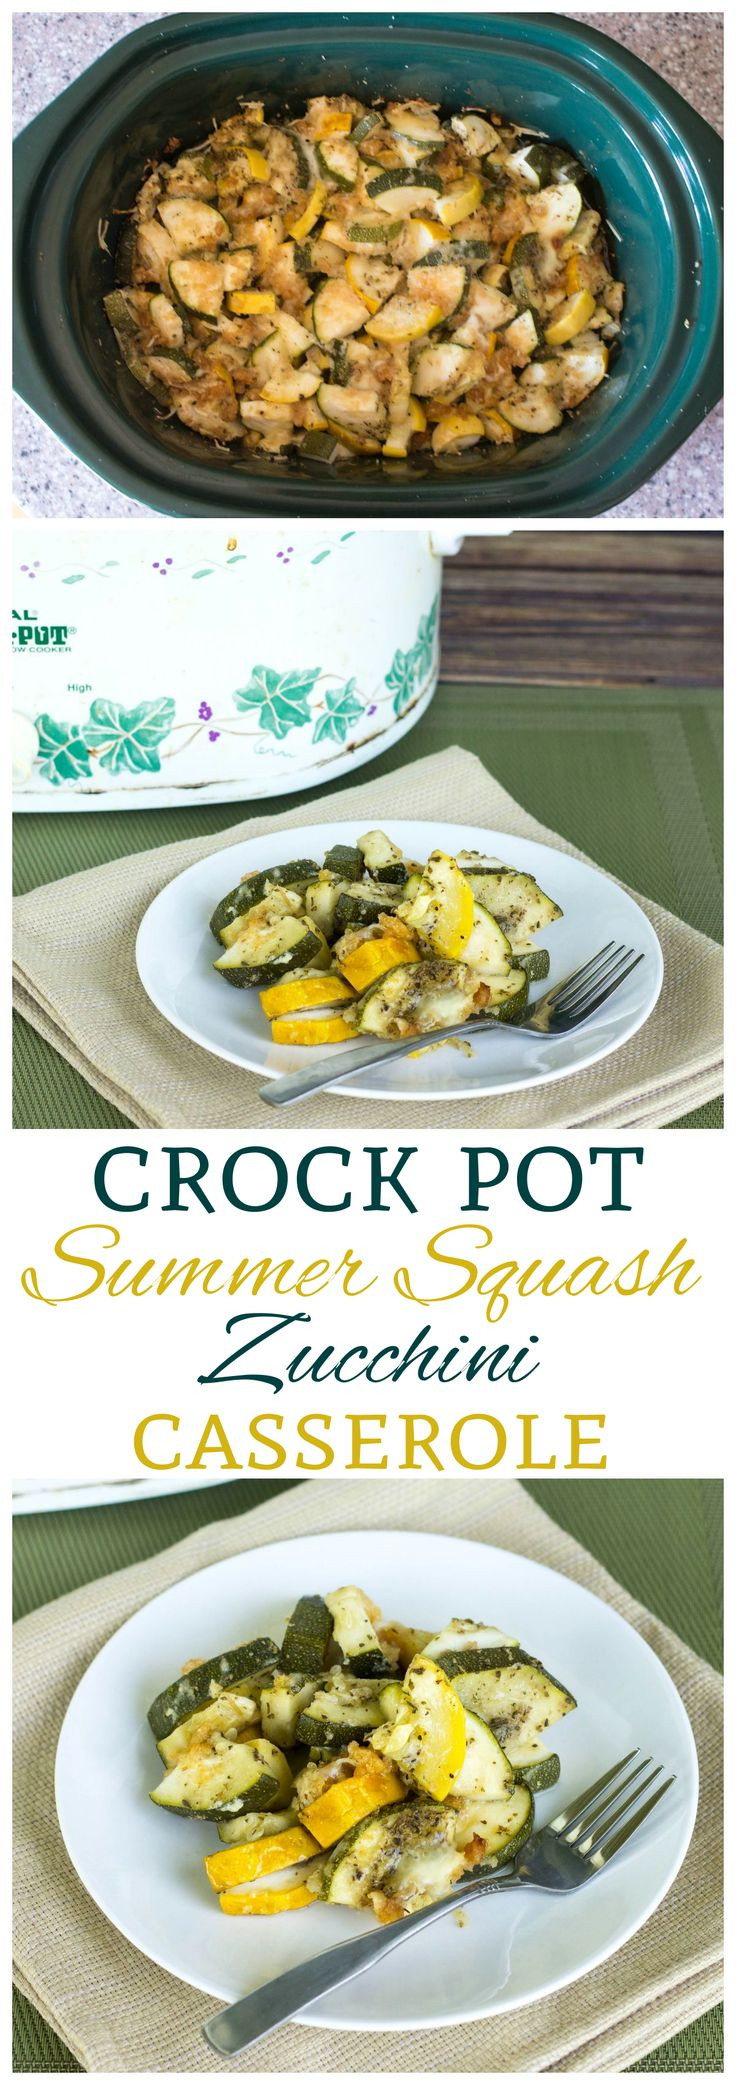 Carbs In Summer Squash
 25 best ideas about Yellow squash casserole on Pinterest